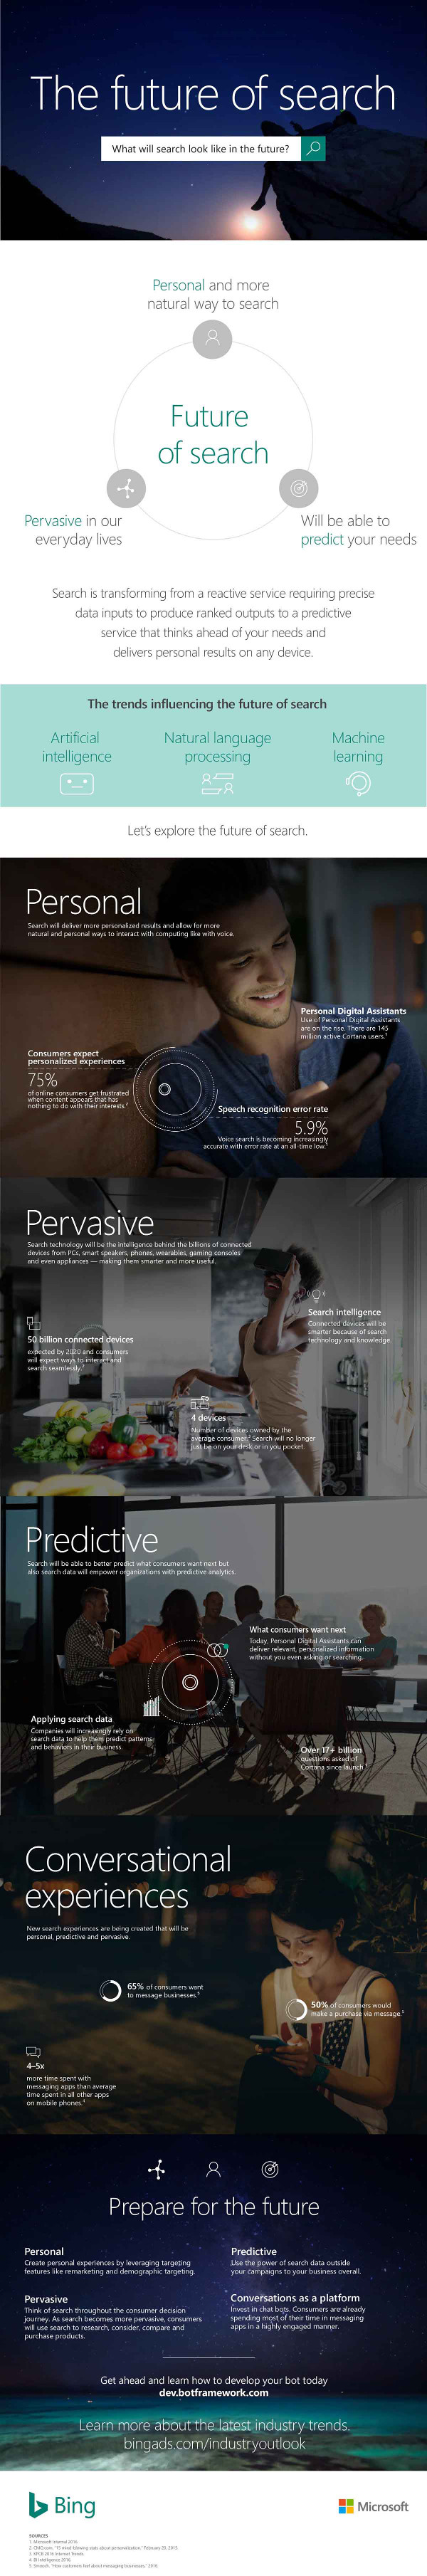 170426-infographic-future-of-search The 3Ps of the Future of Search [Infographic]